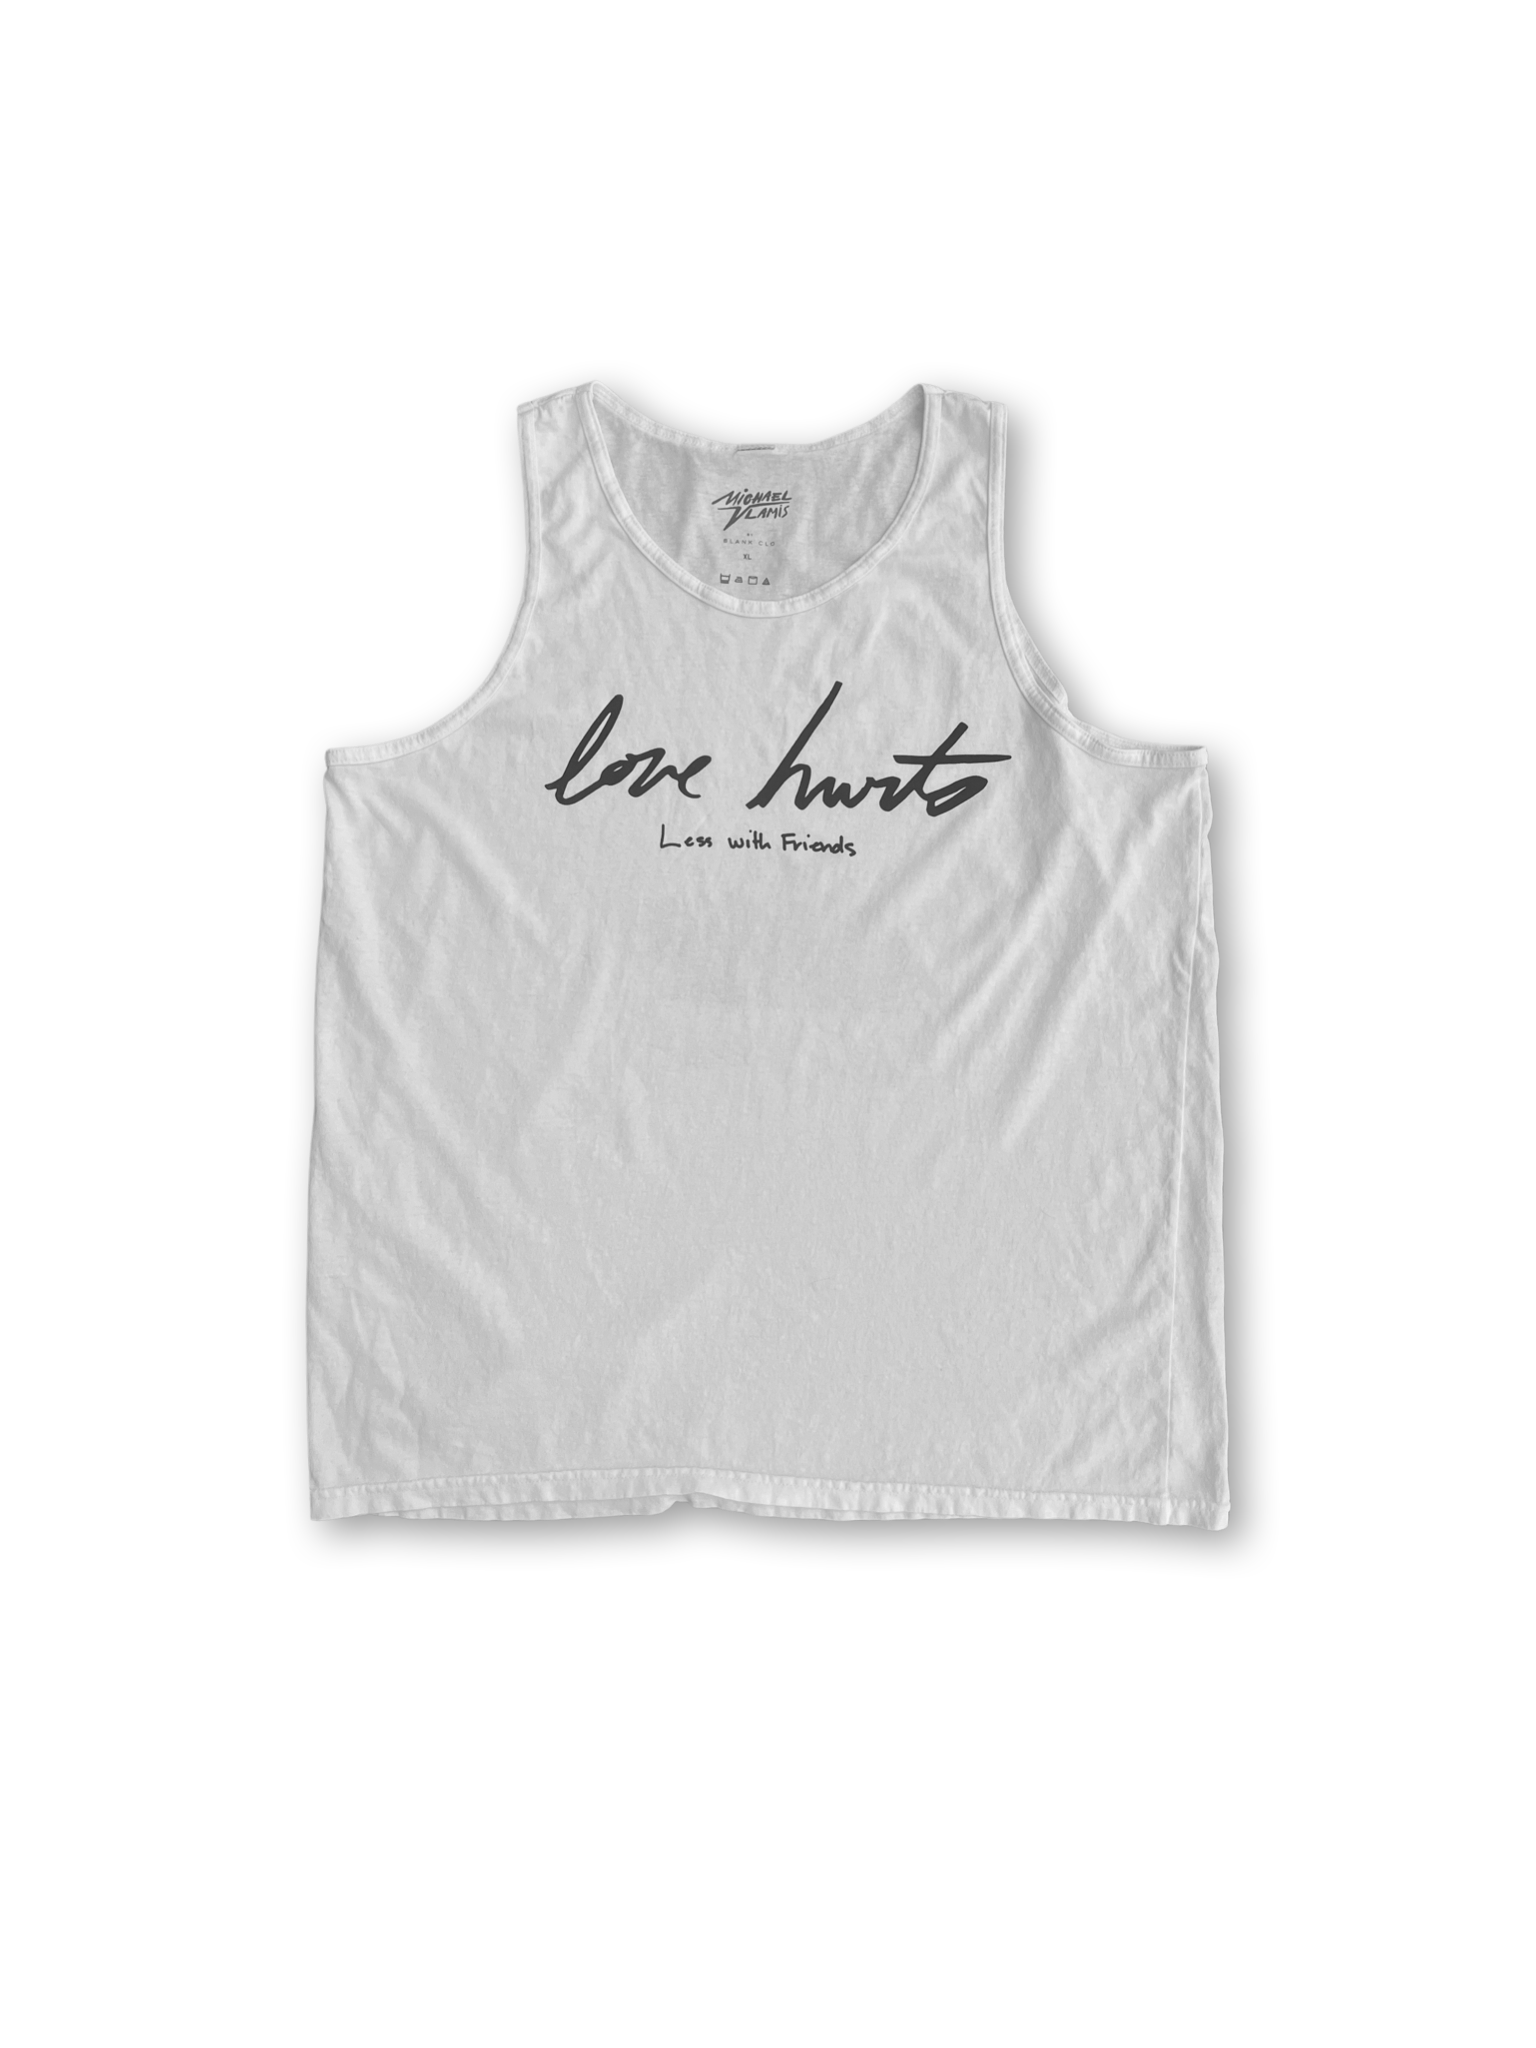 LOVE HURTS LESS WITH FRIENDS TANK TOP